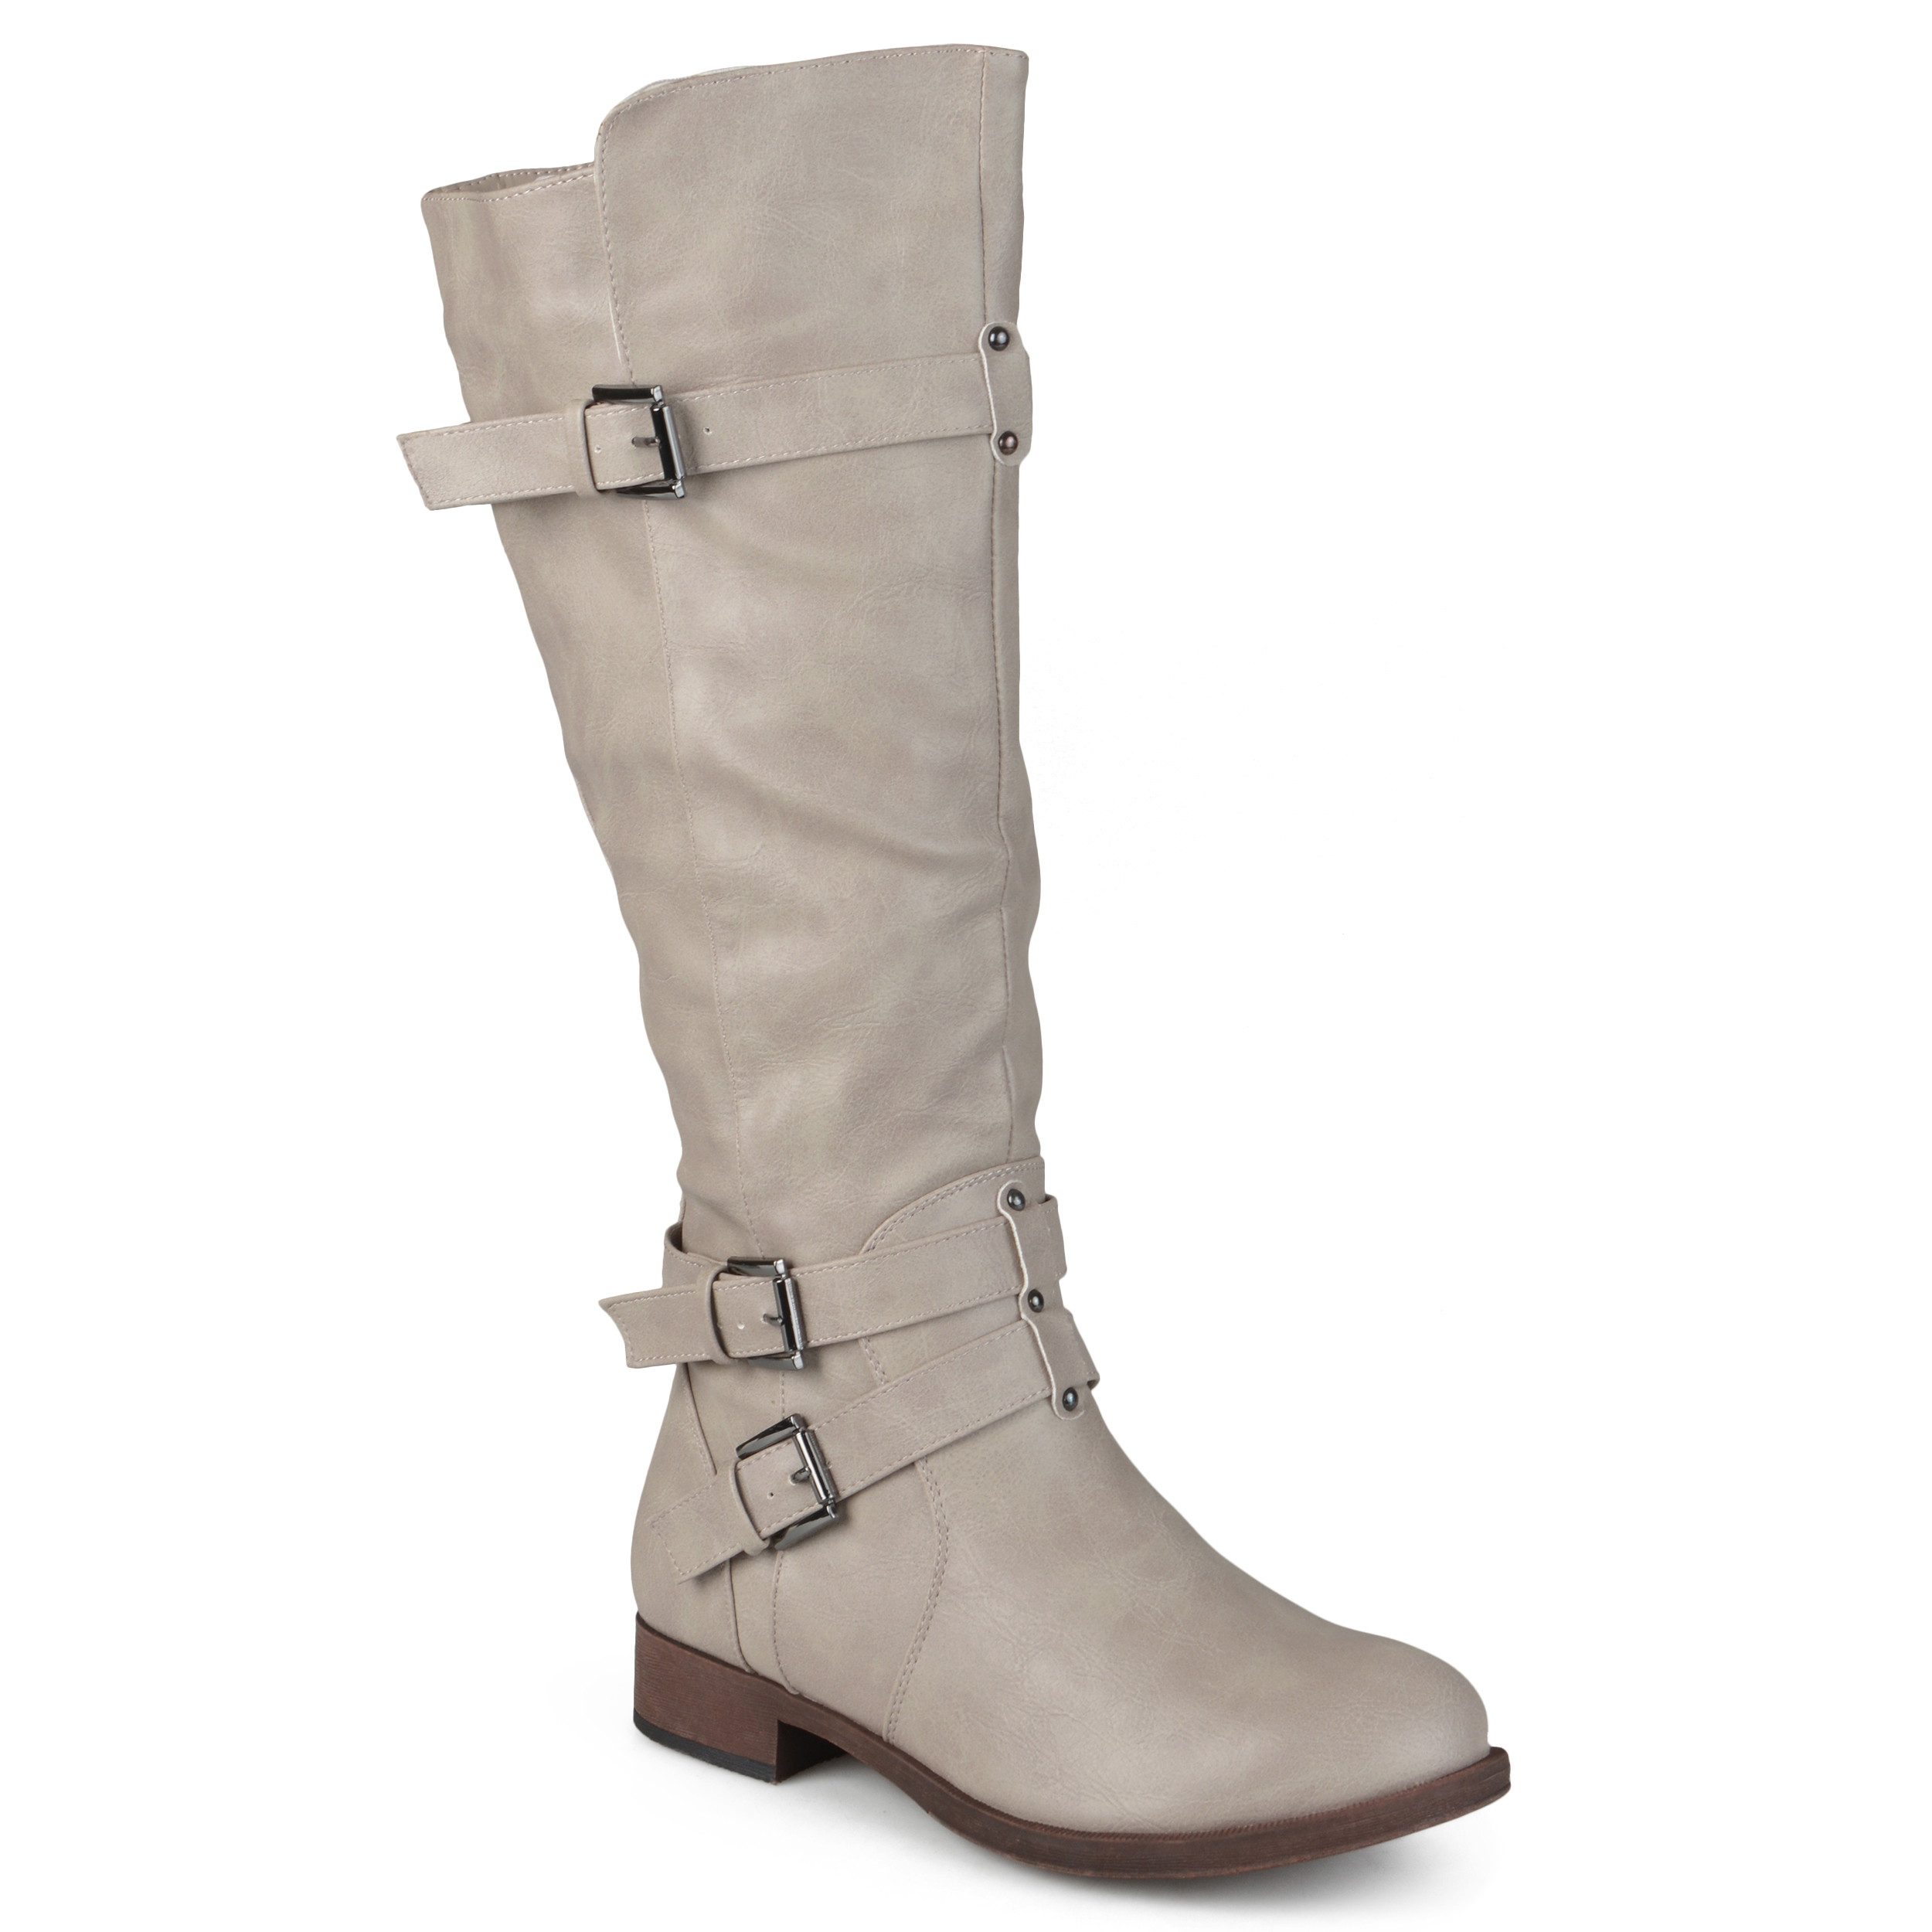 Brinley Co. Womens Tall Wide Calf Buckle Detail Boots - image 1 of 9